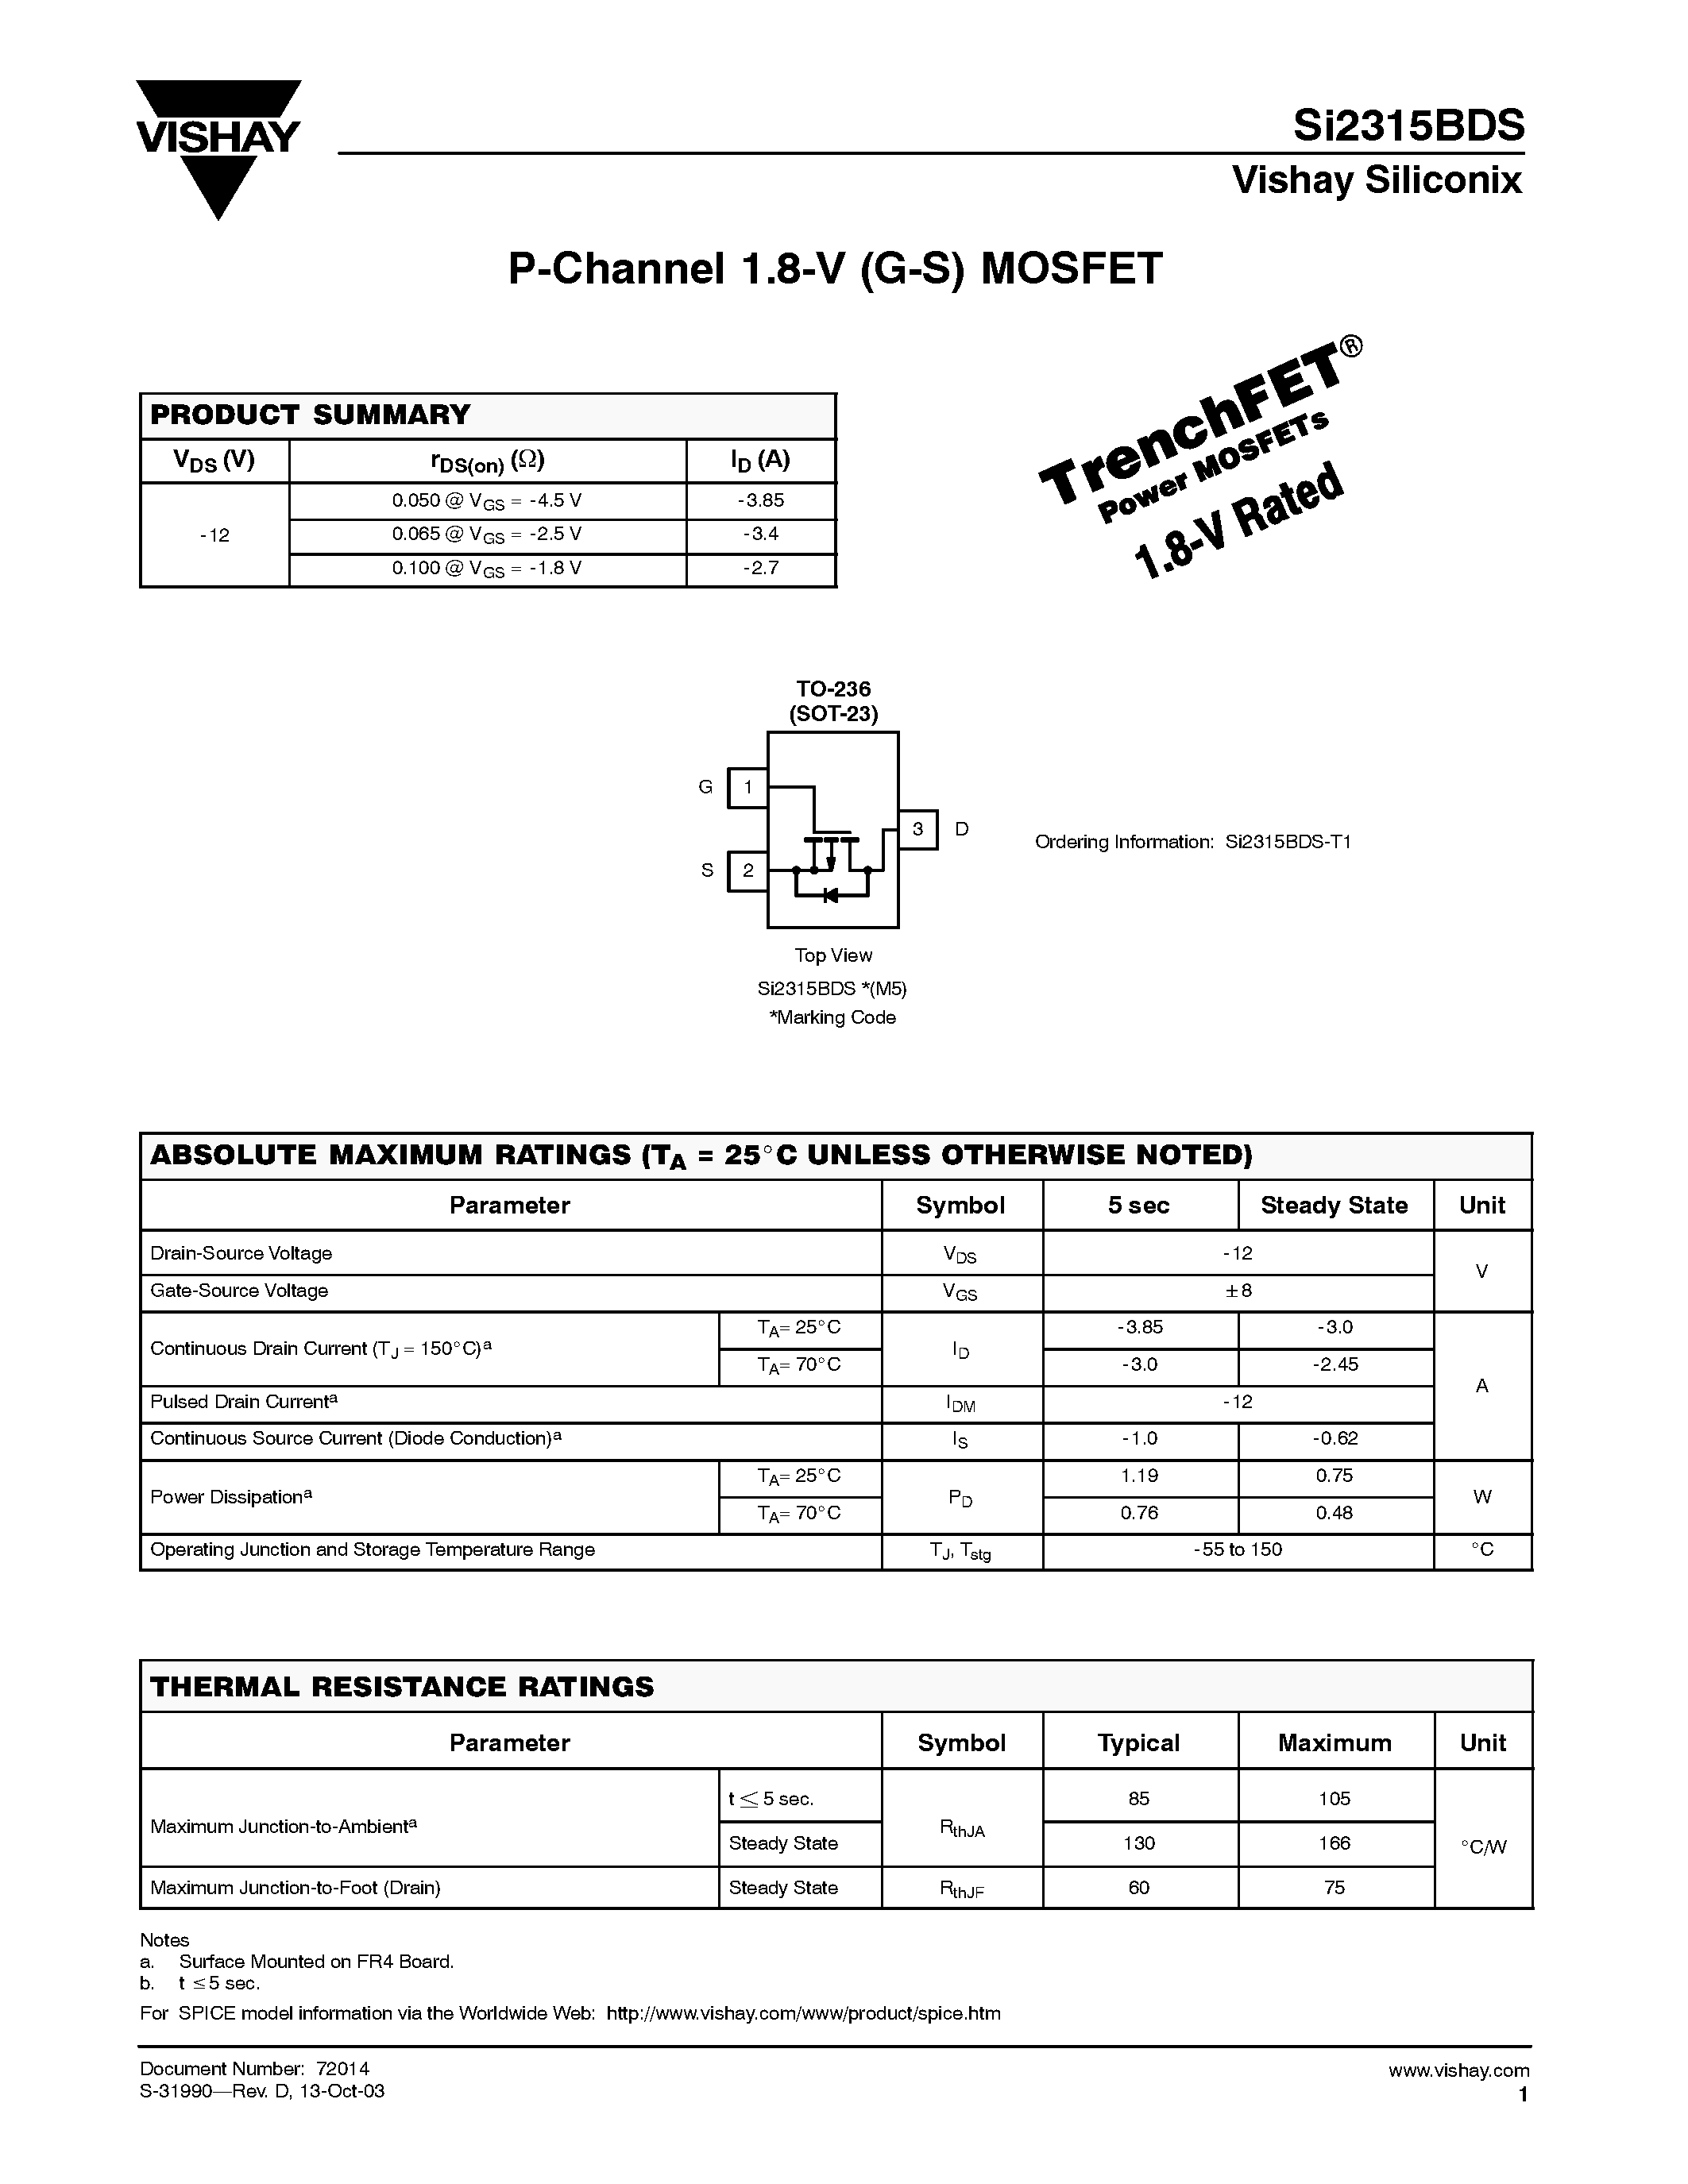 Даташит SI2315BDS - P-Channel 1.8-V (G-S) MOSFET страница 1